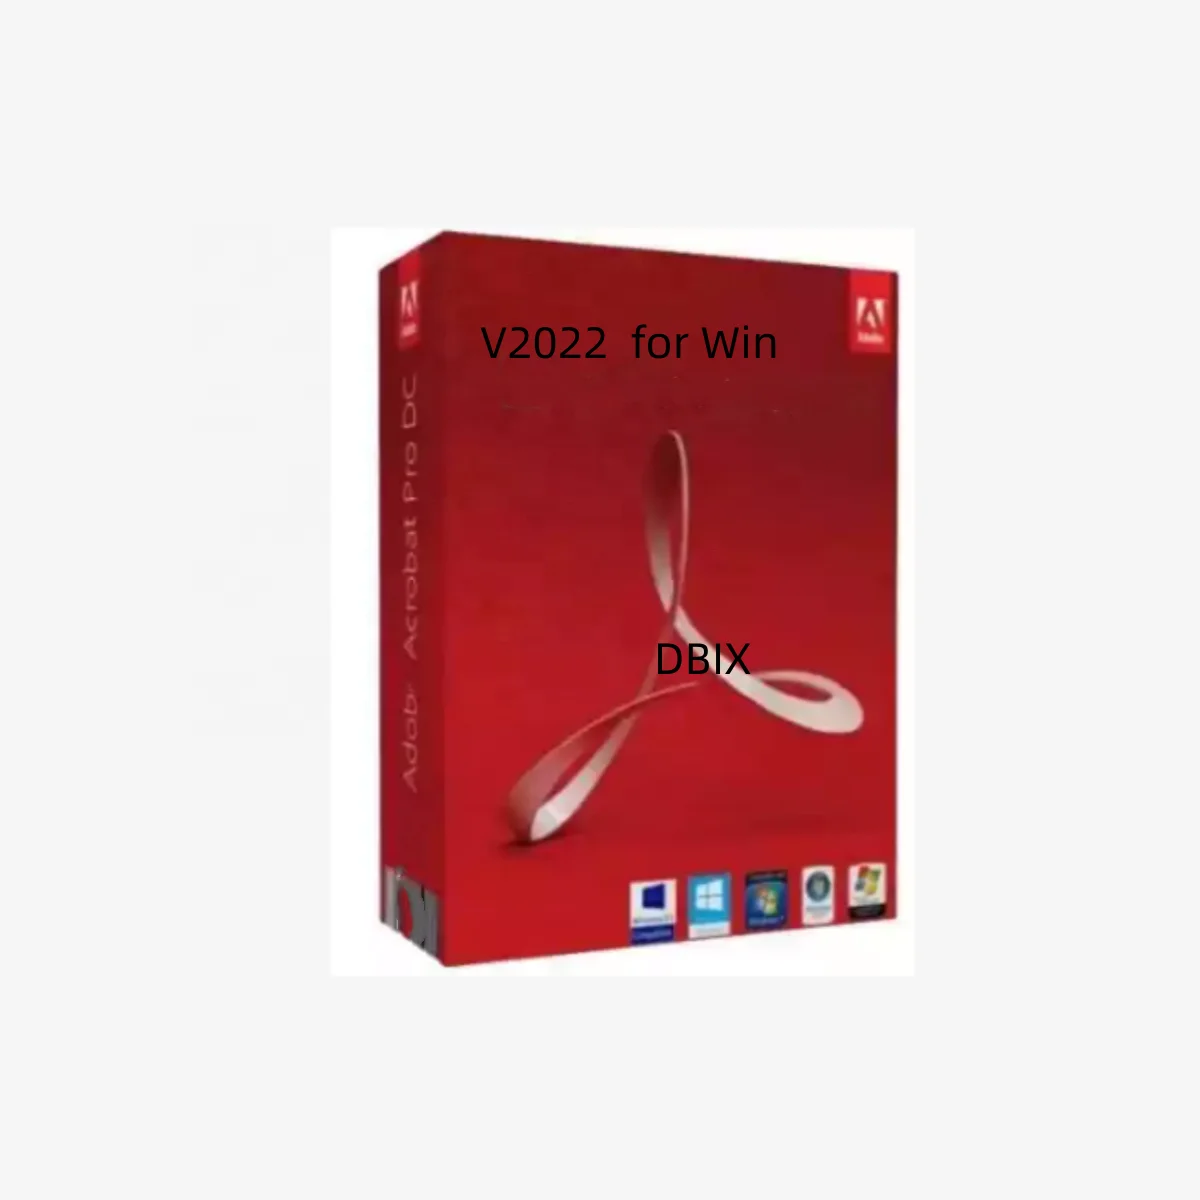 Win Download Send Link Professional Pro Acroba Pro DC 2022 Ad Acrobt Professional DC For PDF Share Reader